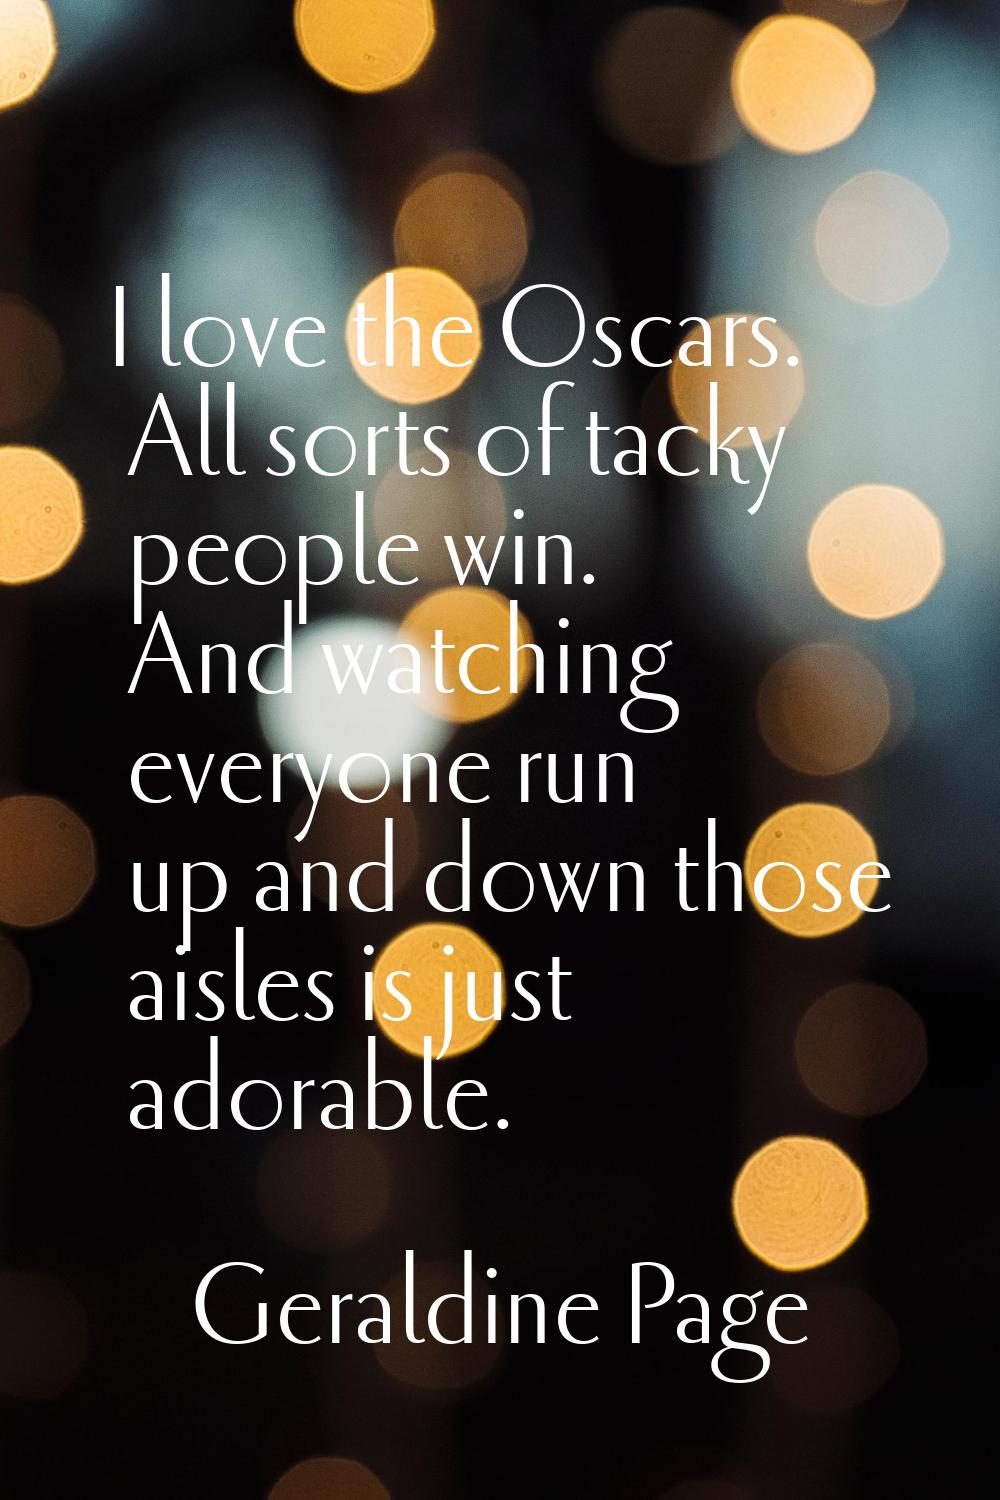 I love the Oscars. All sorts of tacky people win. And watching everyone run up and down those aisle